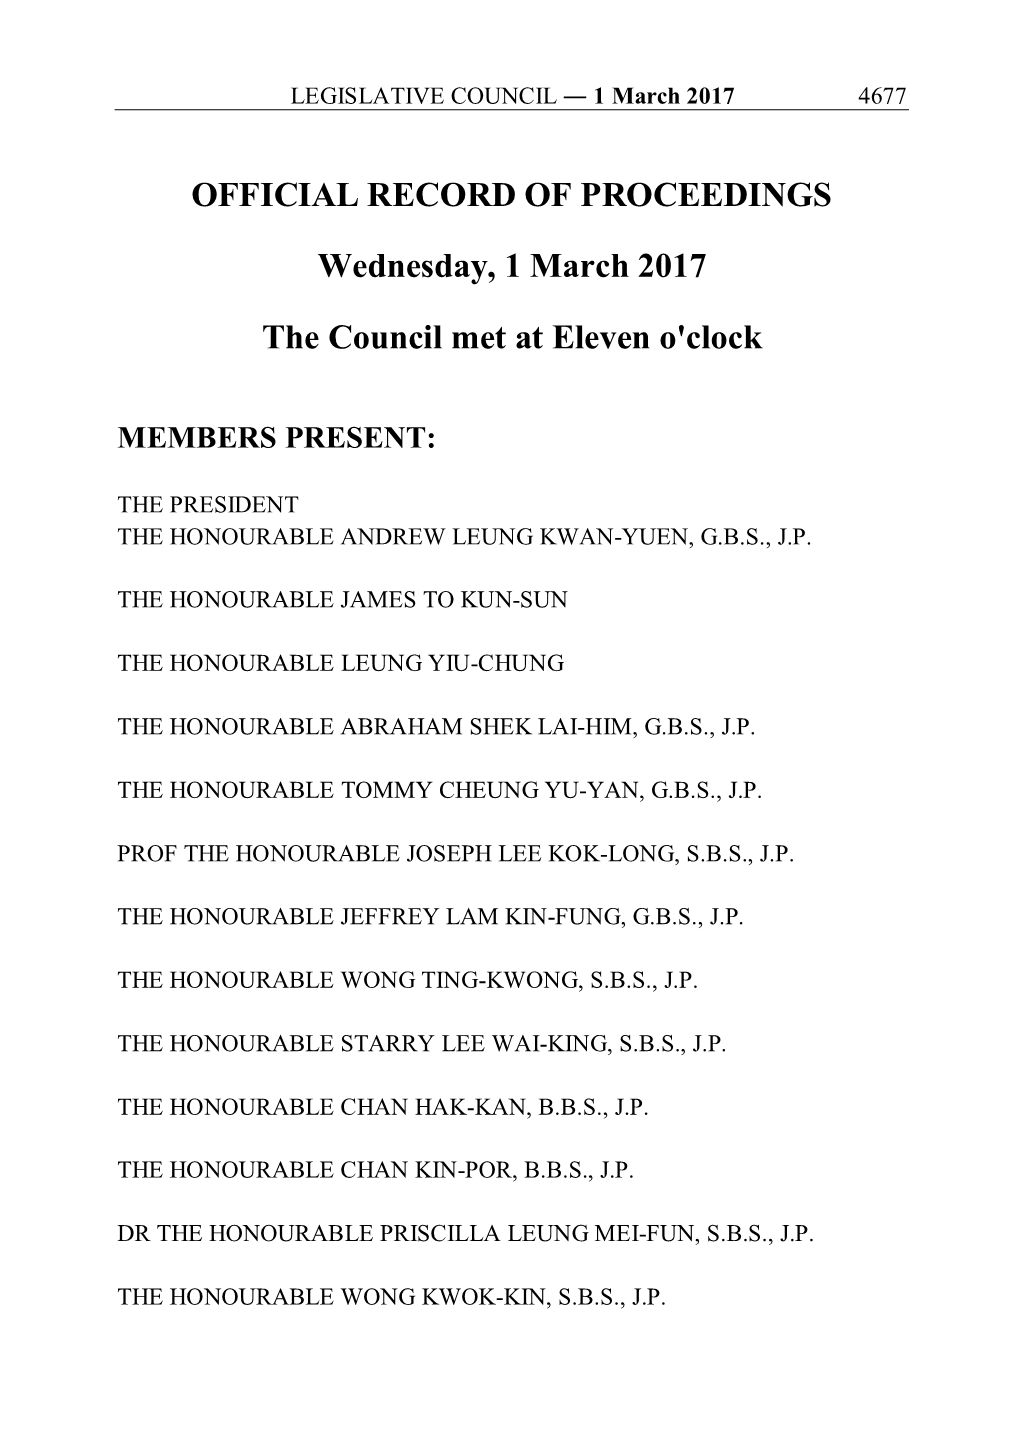 OFFICIAL RECORD of PROCEEDINGS Wednesday, 1